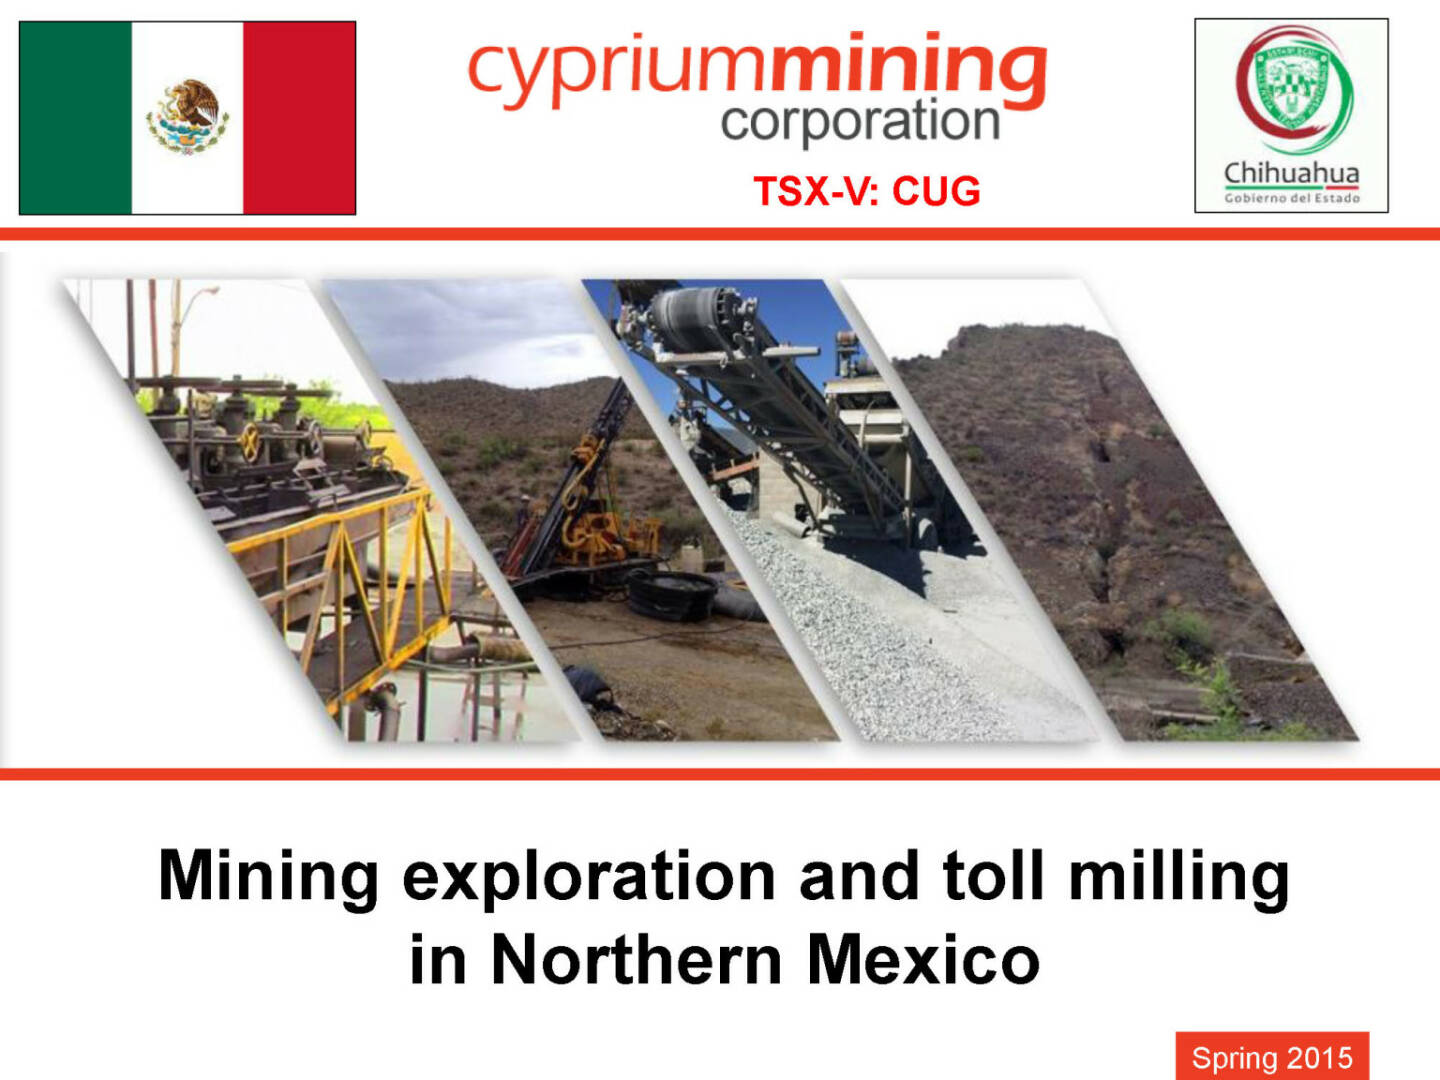 Mining exploration and toll milling in Northern Mexico